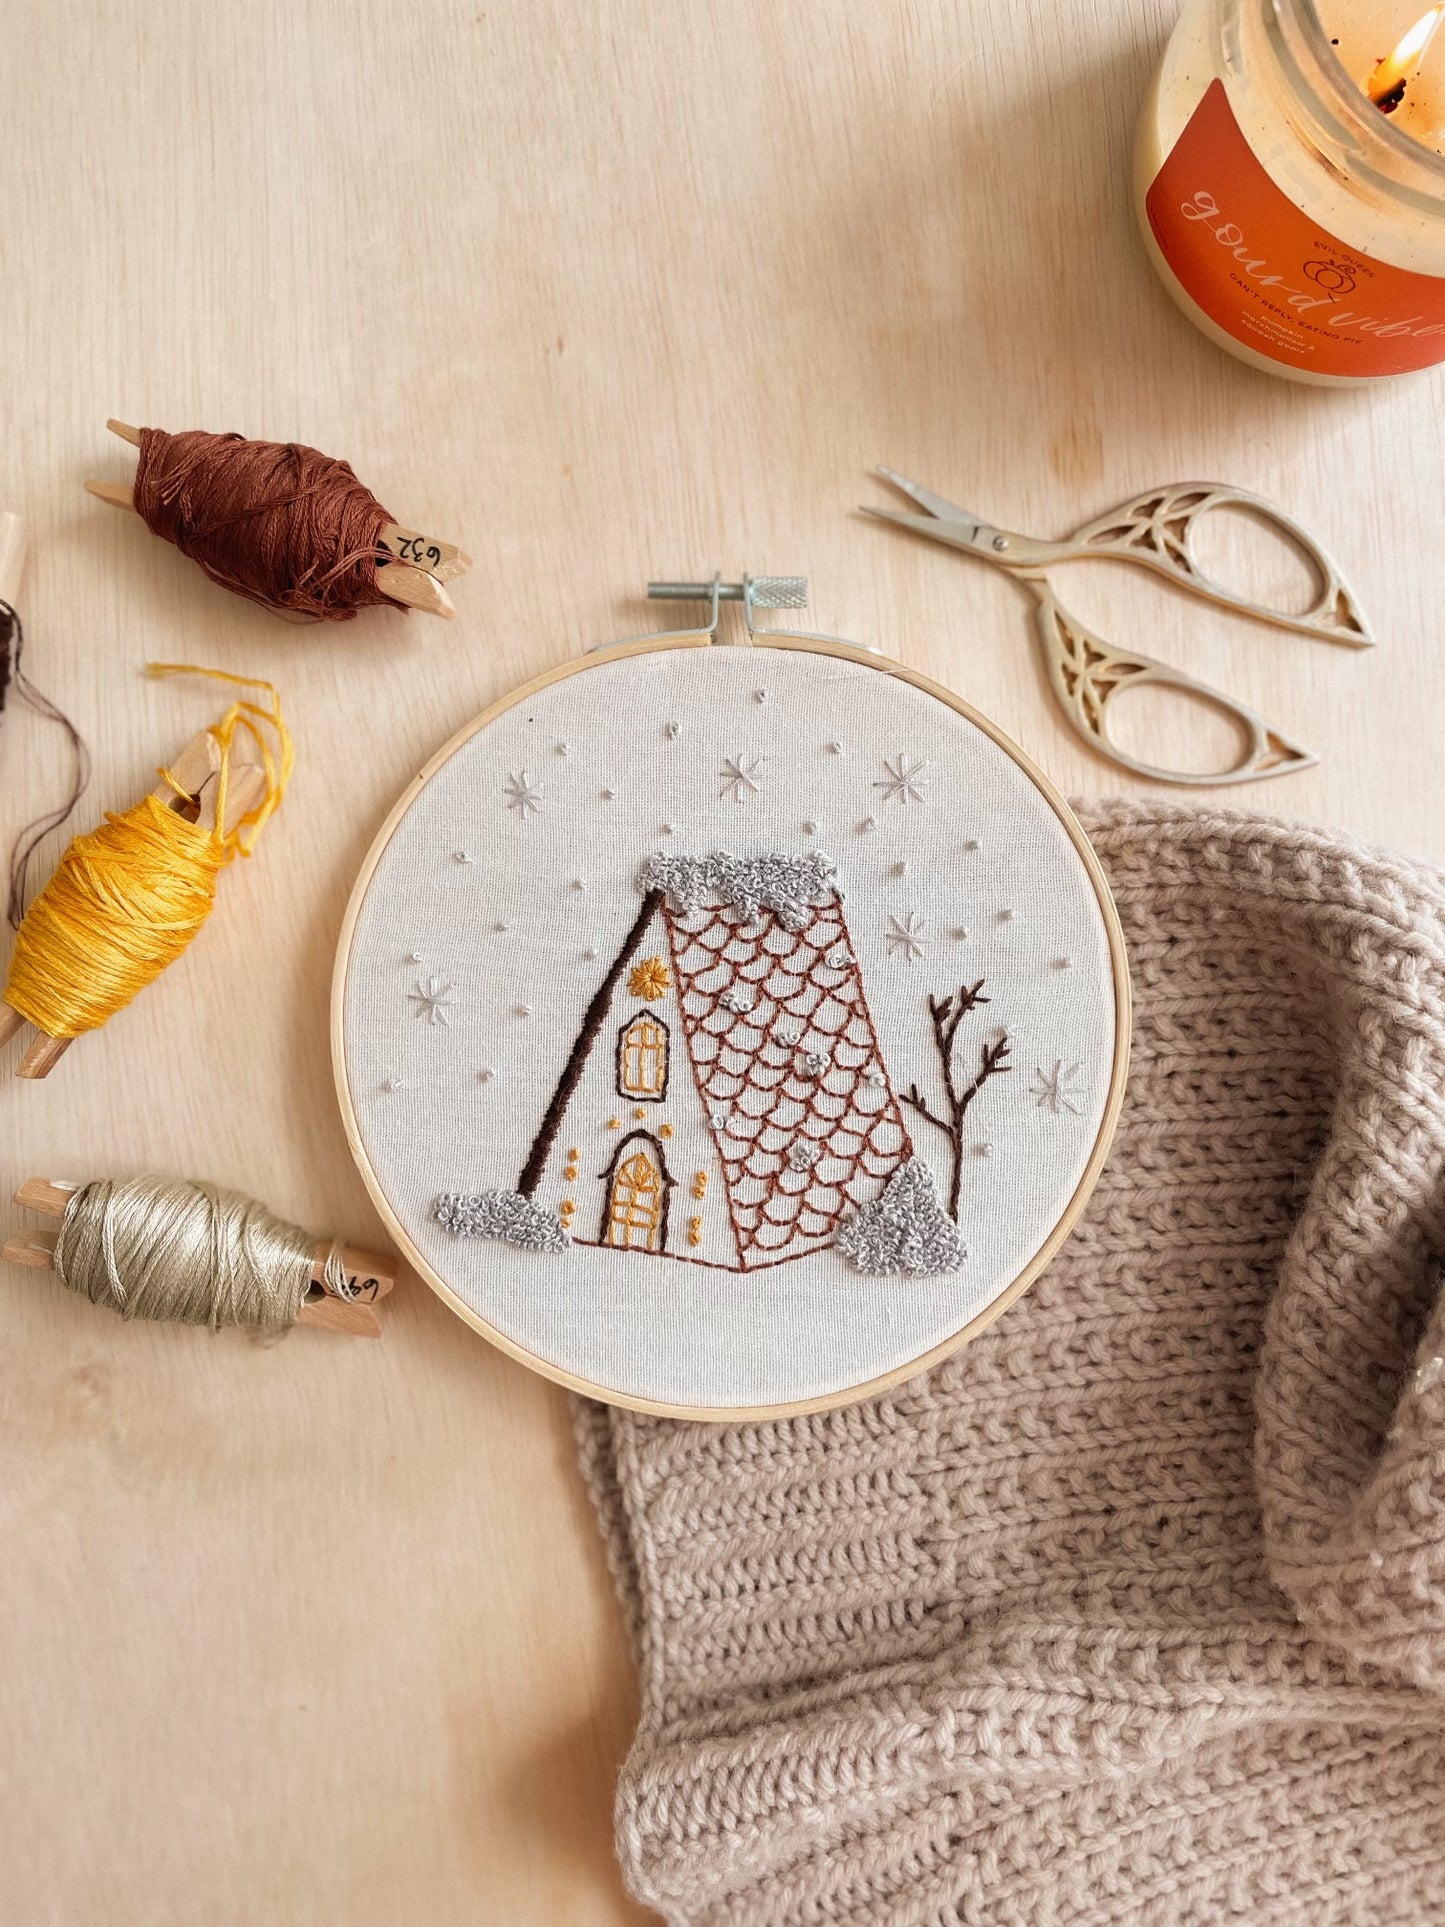 A-Frame Cabin Embroidery